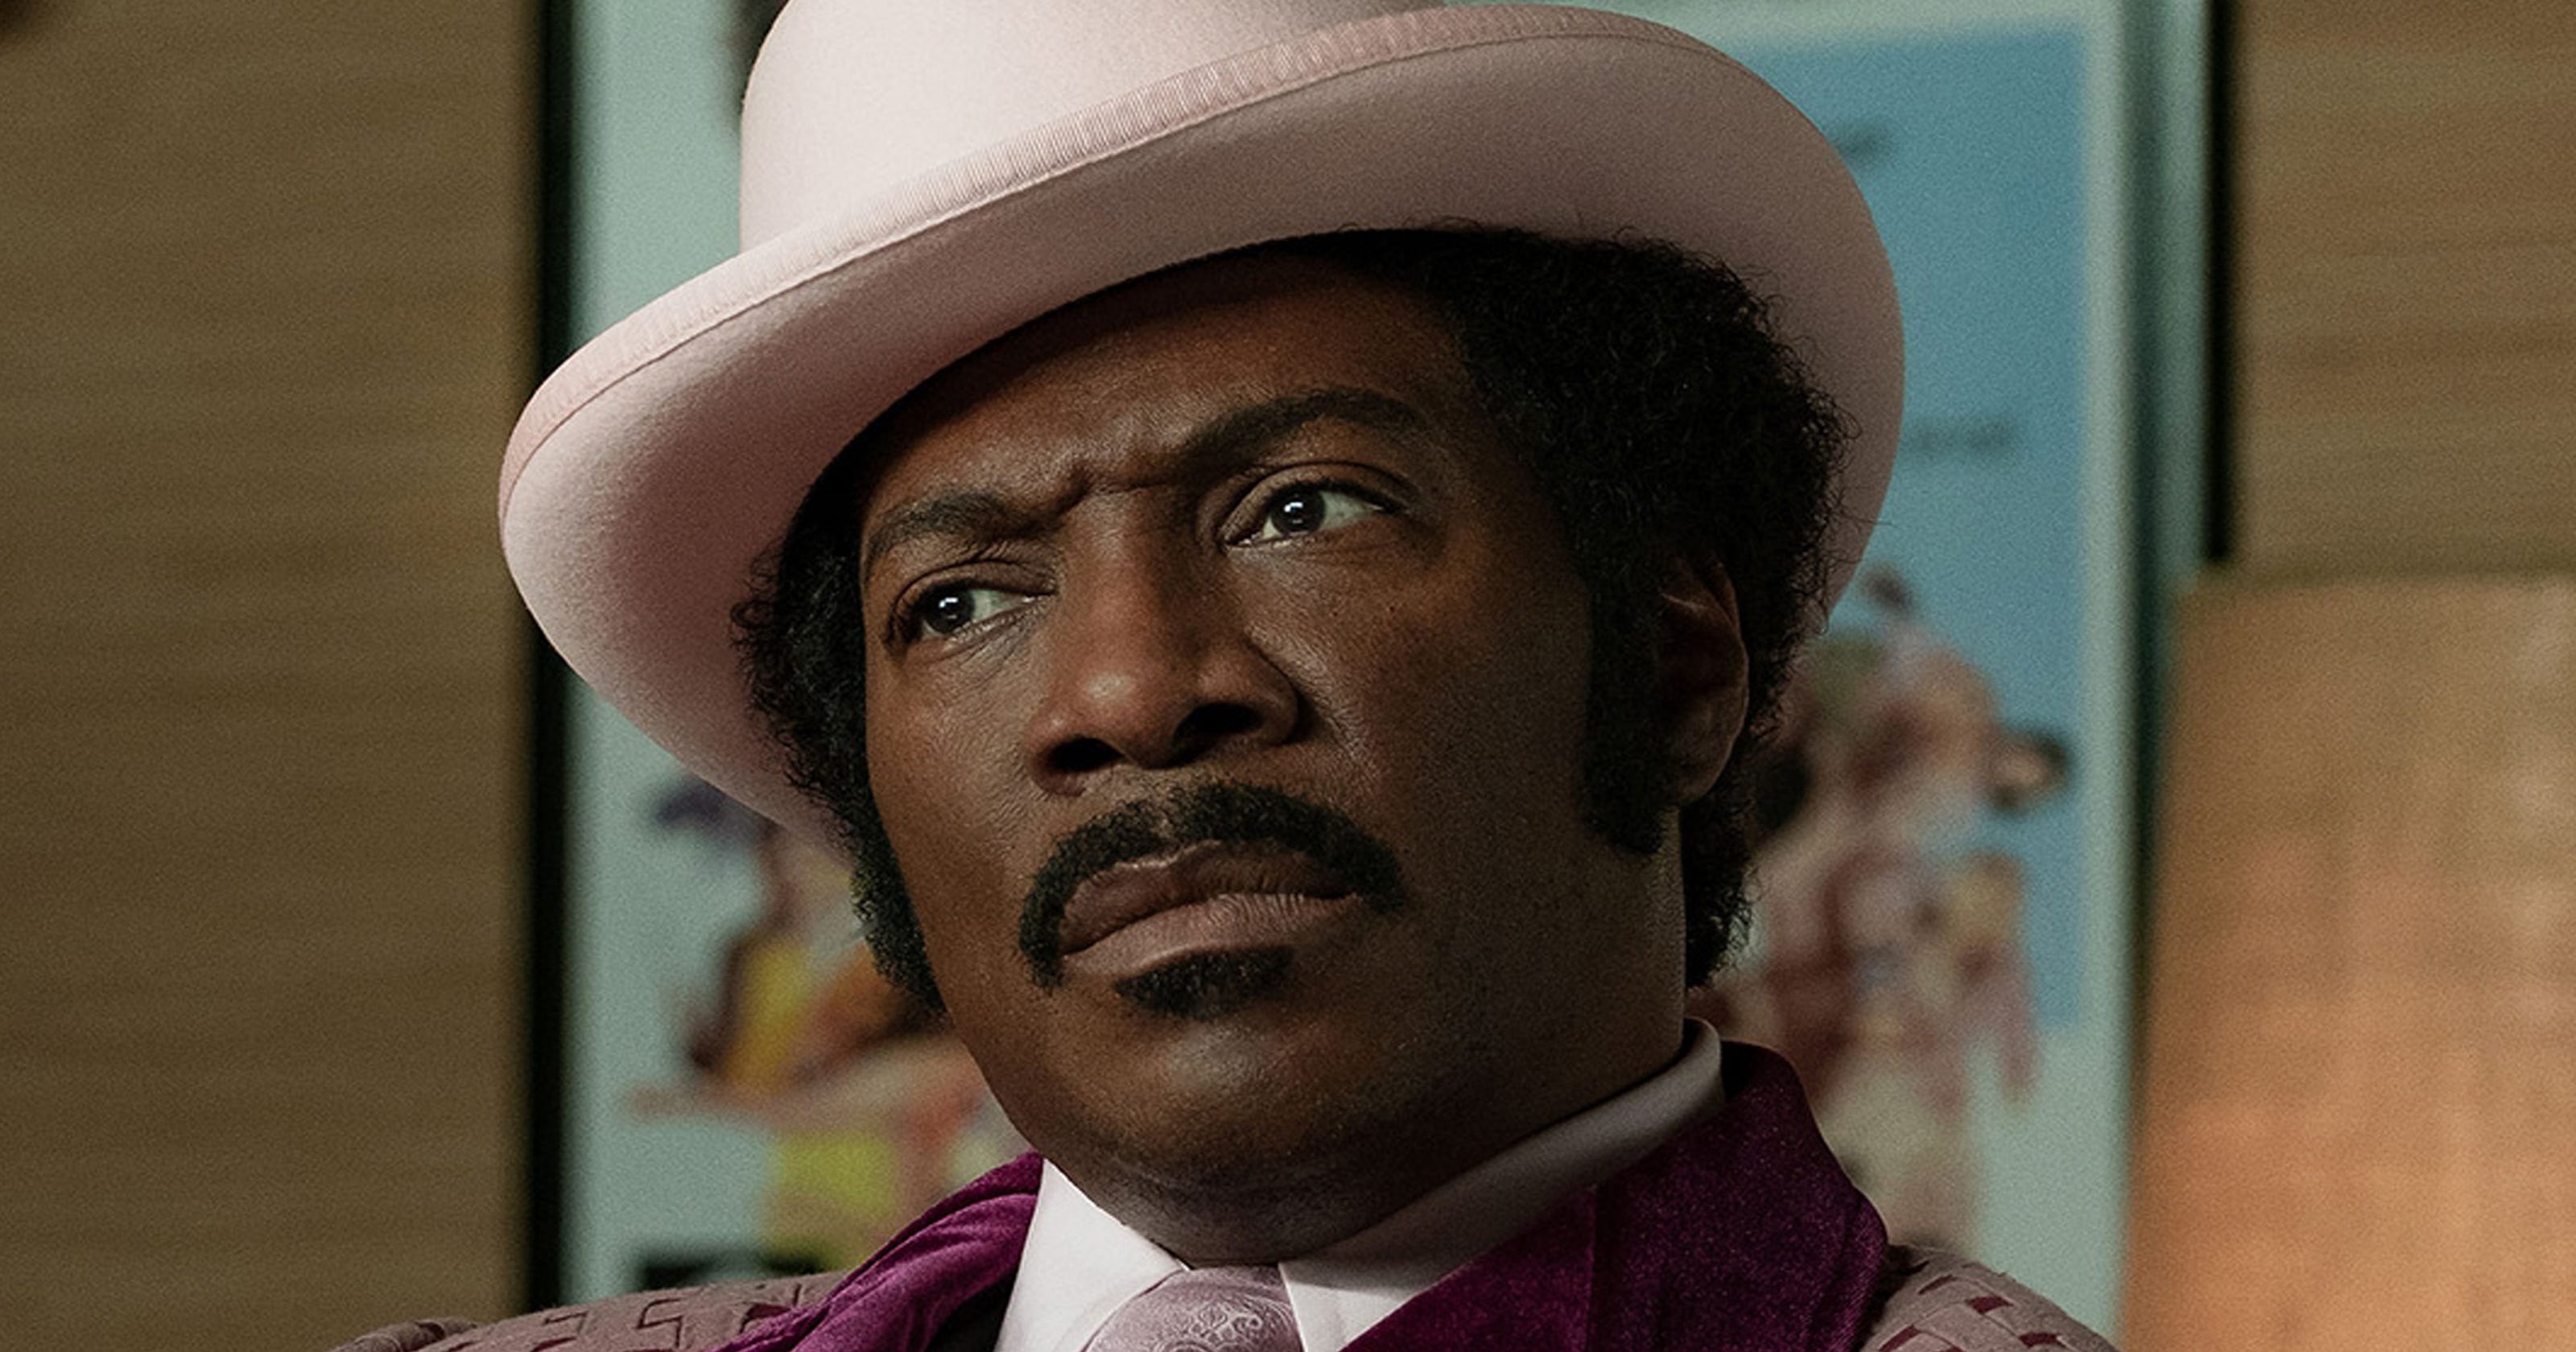 'Dolemite Is My Name' is a comeback showcase for Eddie Murphy